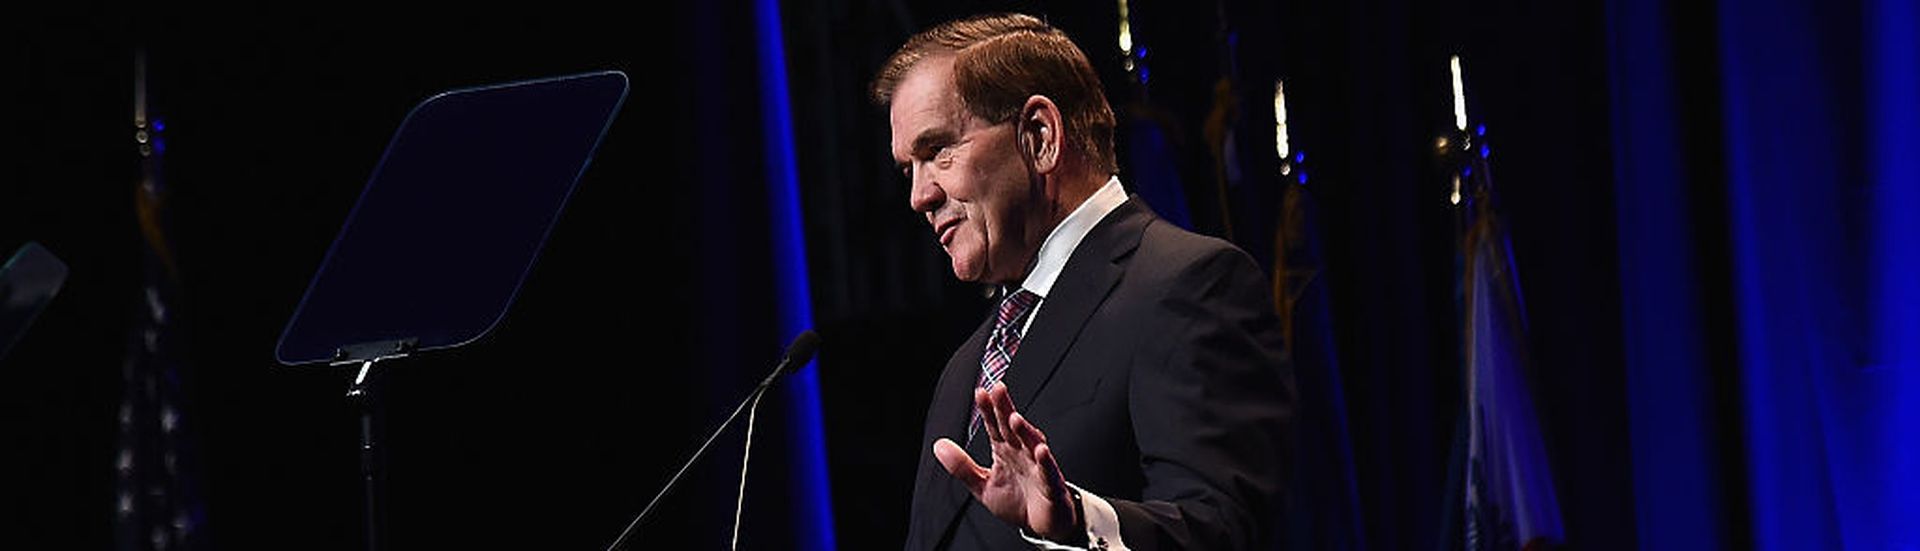 NEW YORK, NY &#8211; MAY 19:  Former Governor Tom Ridge speaks onstage during the Federal Enforcement Homeland Security Foundation 2016 Ridge Awards at Sheraton Times Square on May 19, 2016 in New York City.  (Photo by Ilya S. Savenok/Getty Images for FEHSF)